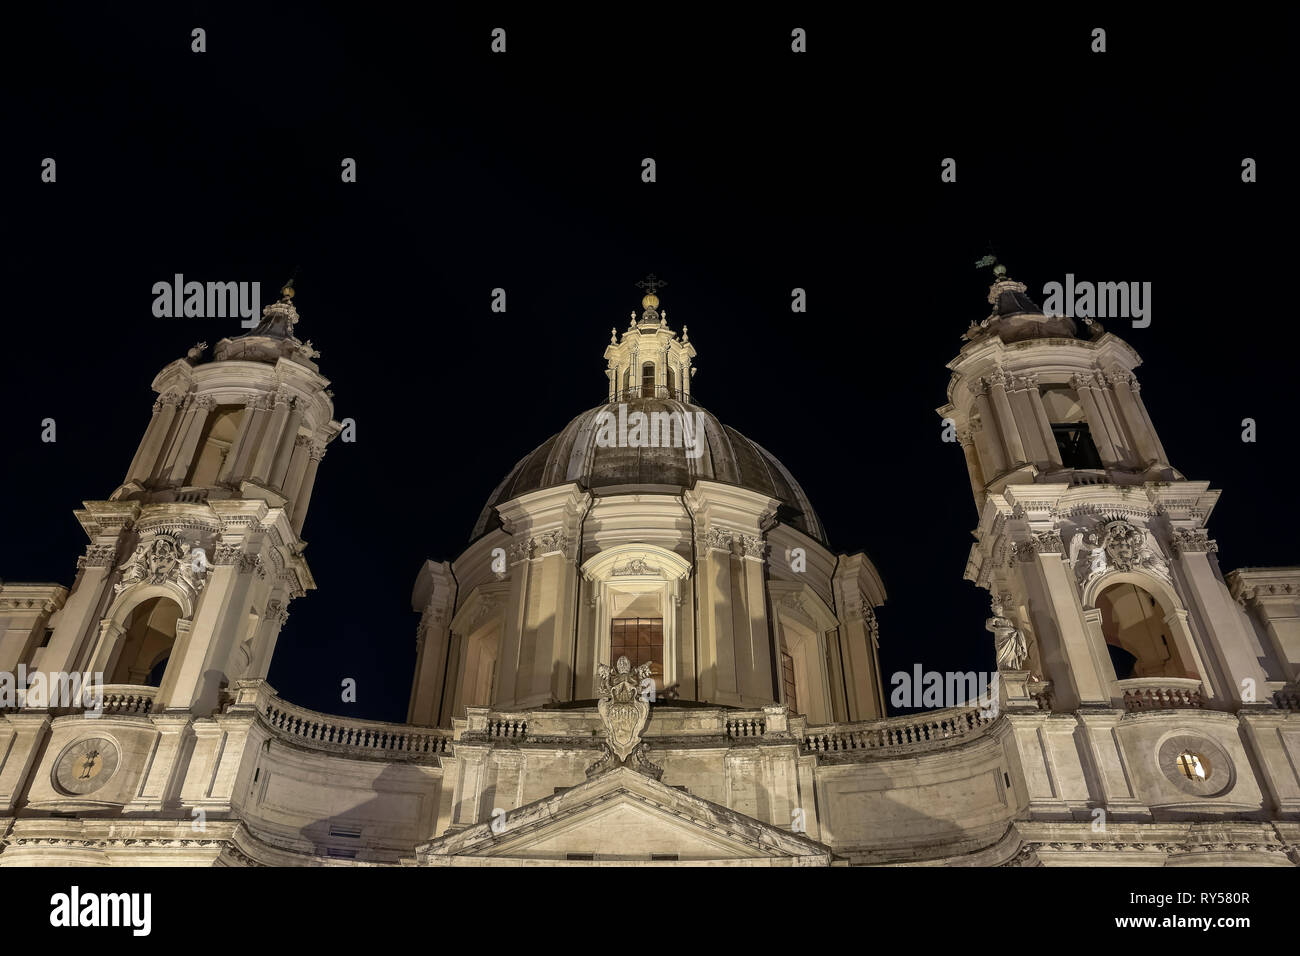 Piazza Navona Square, Borromini's Saint Agnese in Agone church. Front low angle view by night. Rome, Italy, Europe, European Union, EU. Copy space. Stock Photo